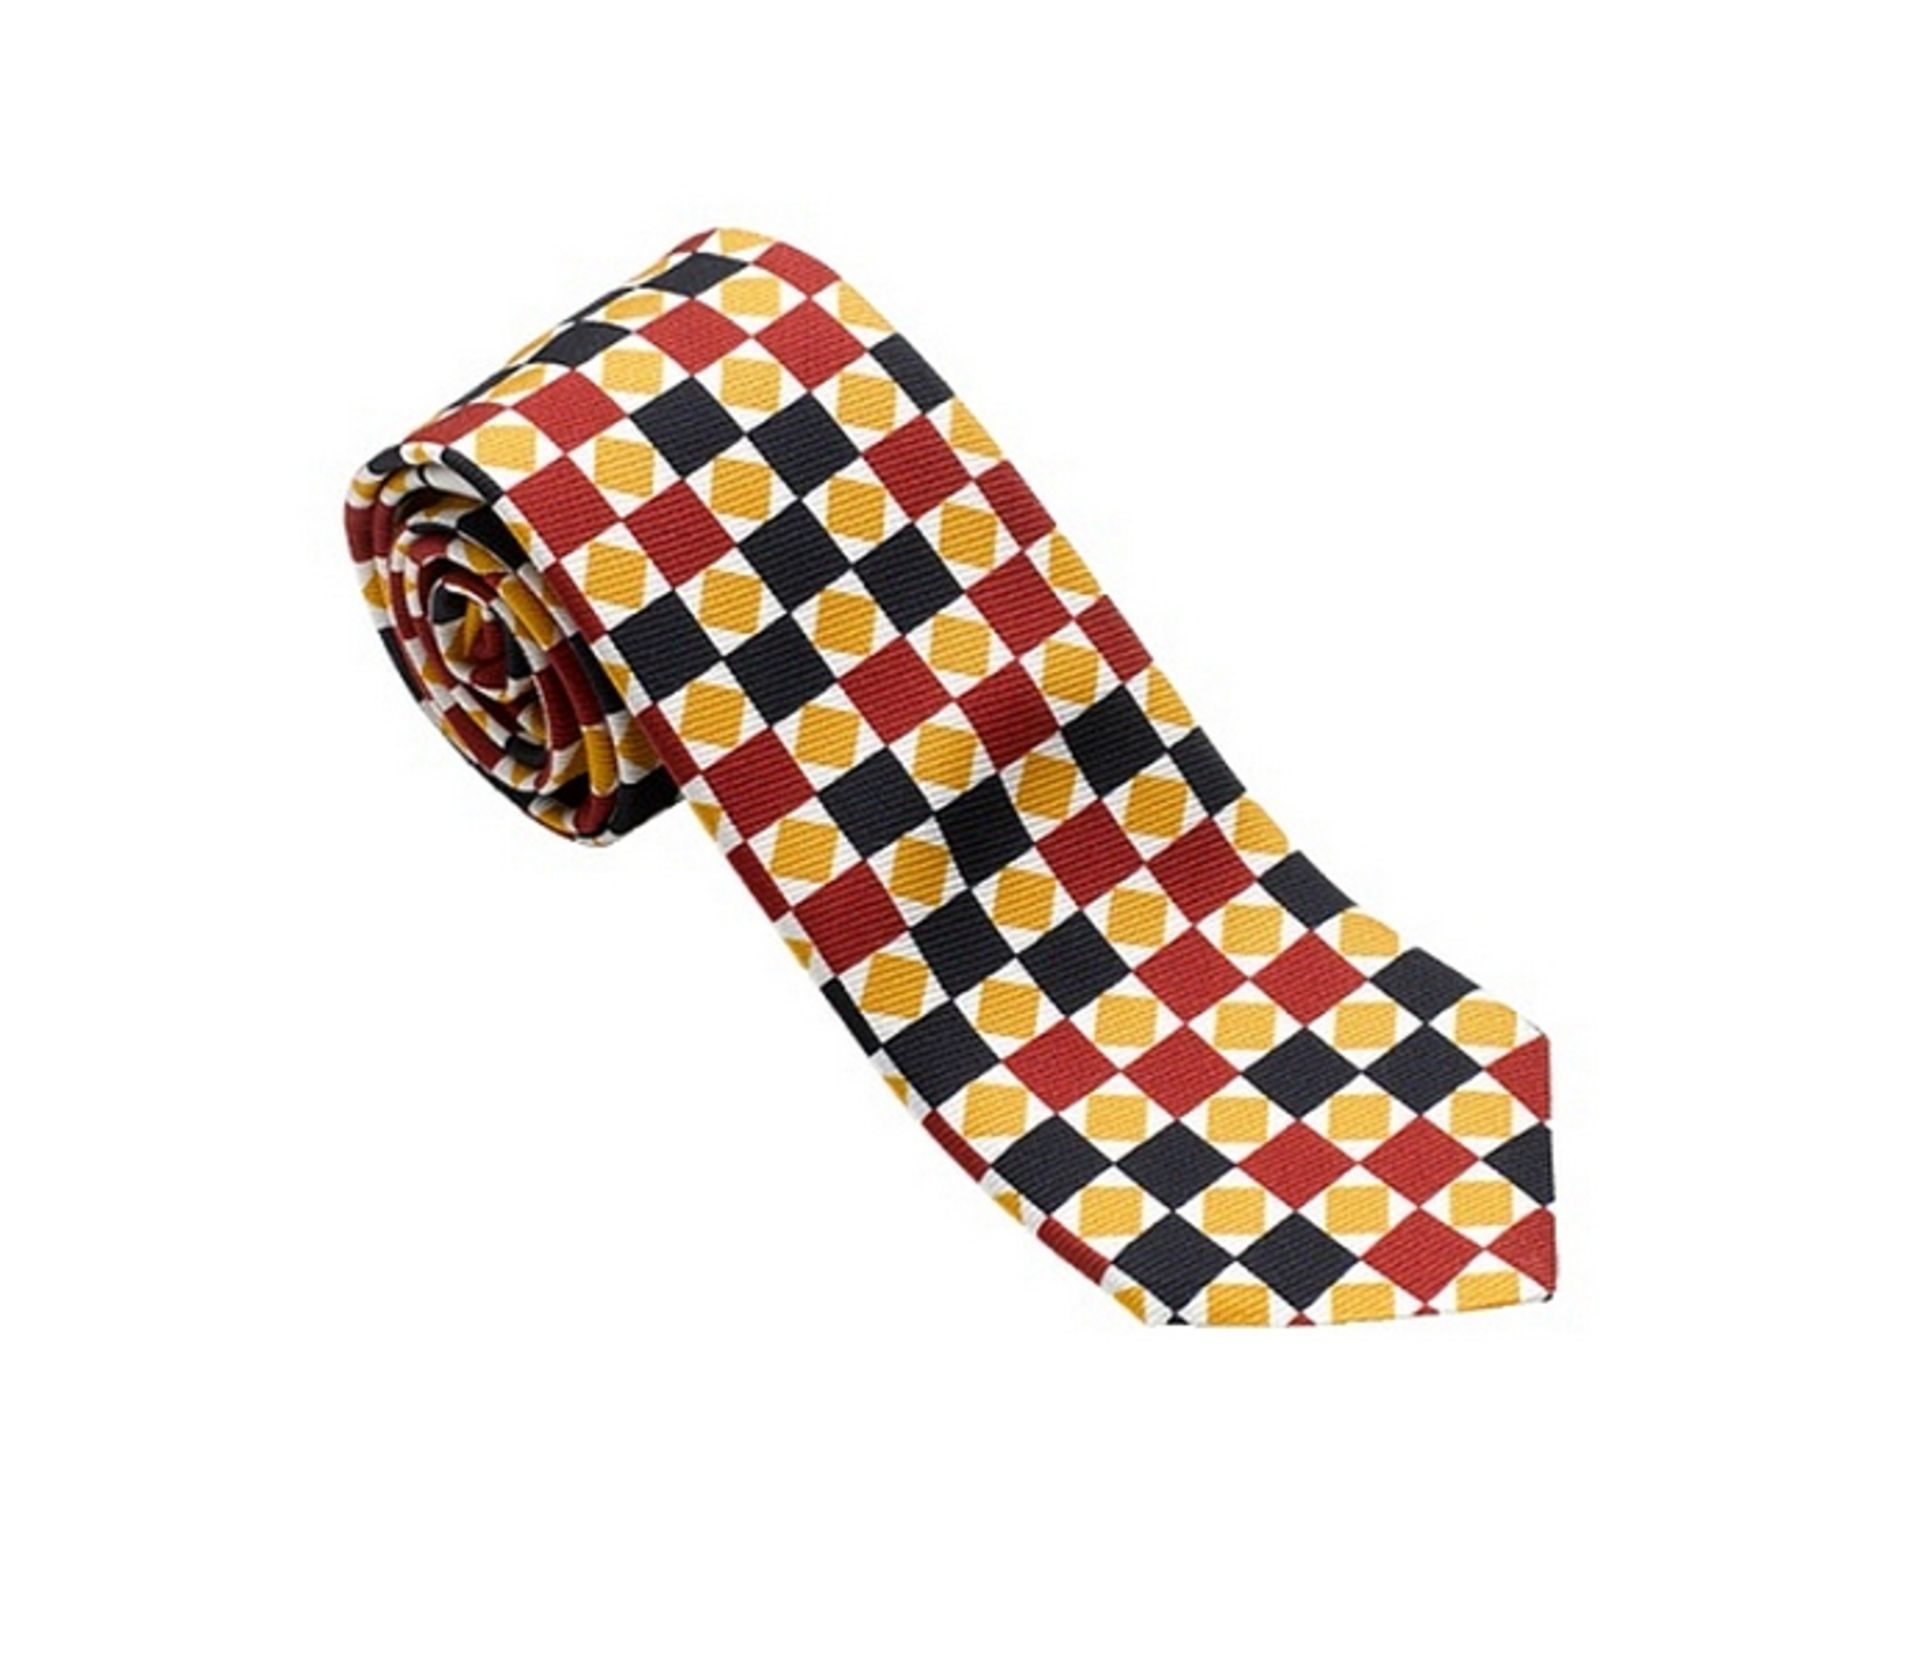 ROMA MOSAIC TIE MOSAICS CELEBRATION RRP £50.00 If you’re looking for a top quality tie to add some